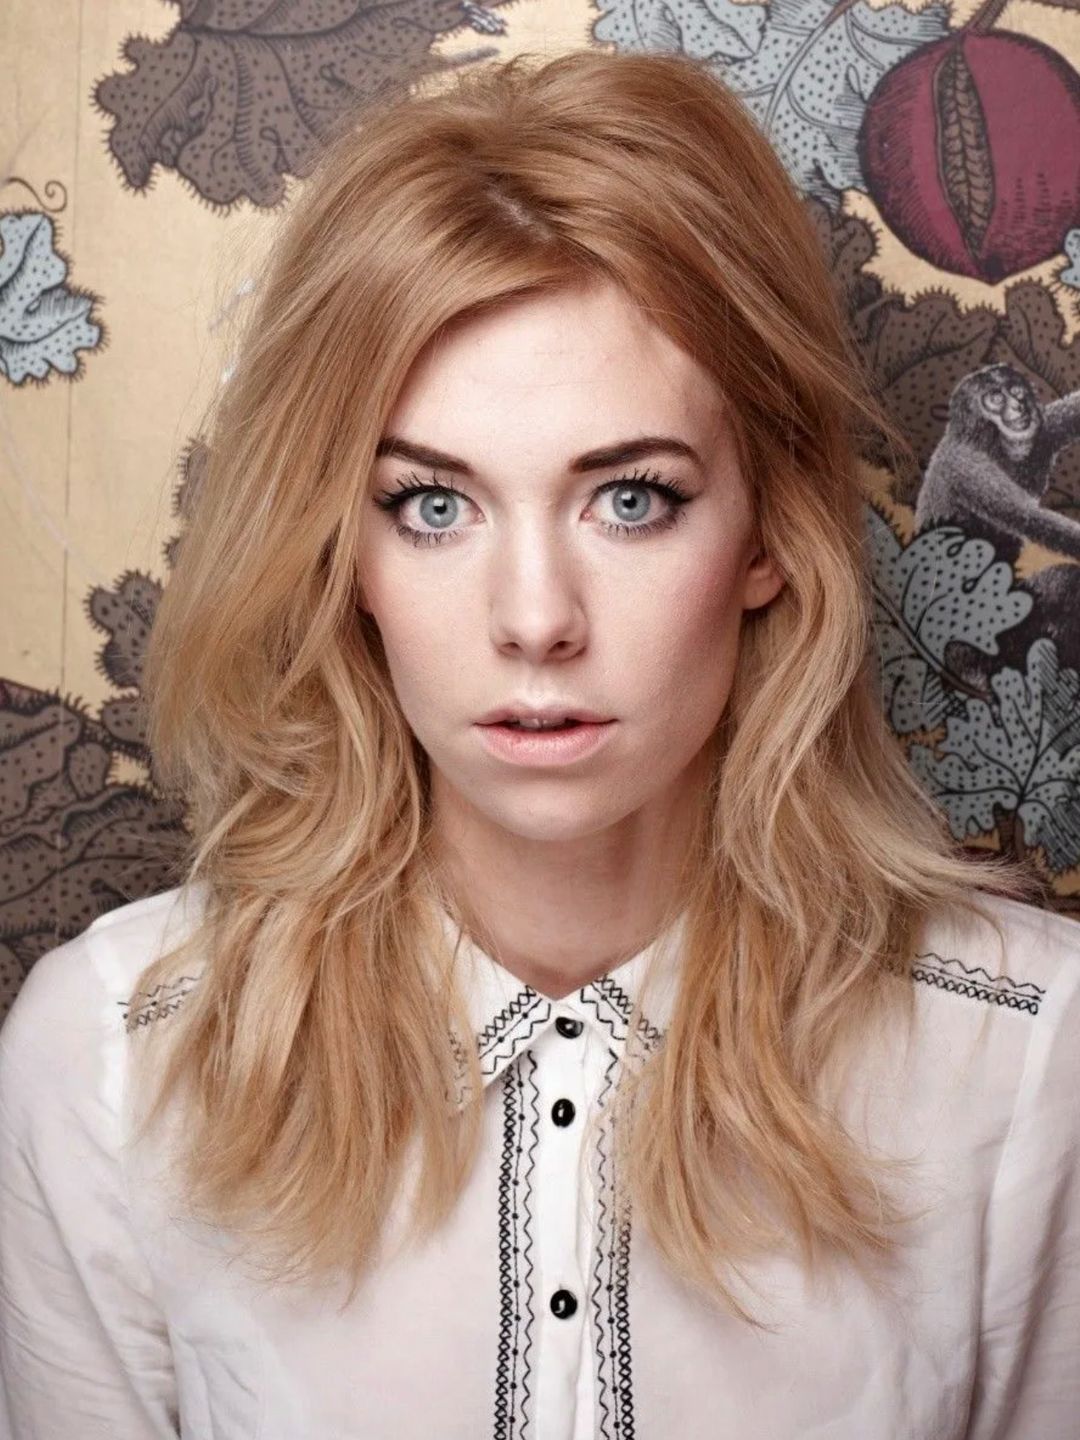 Vanessa Kirby who is she